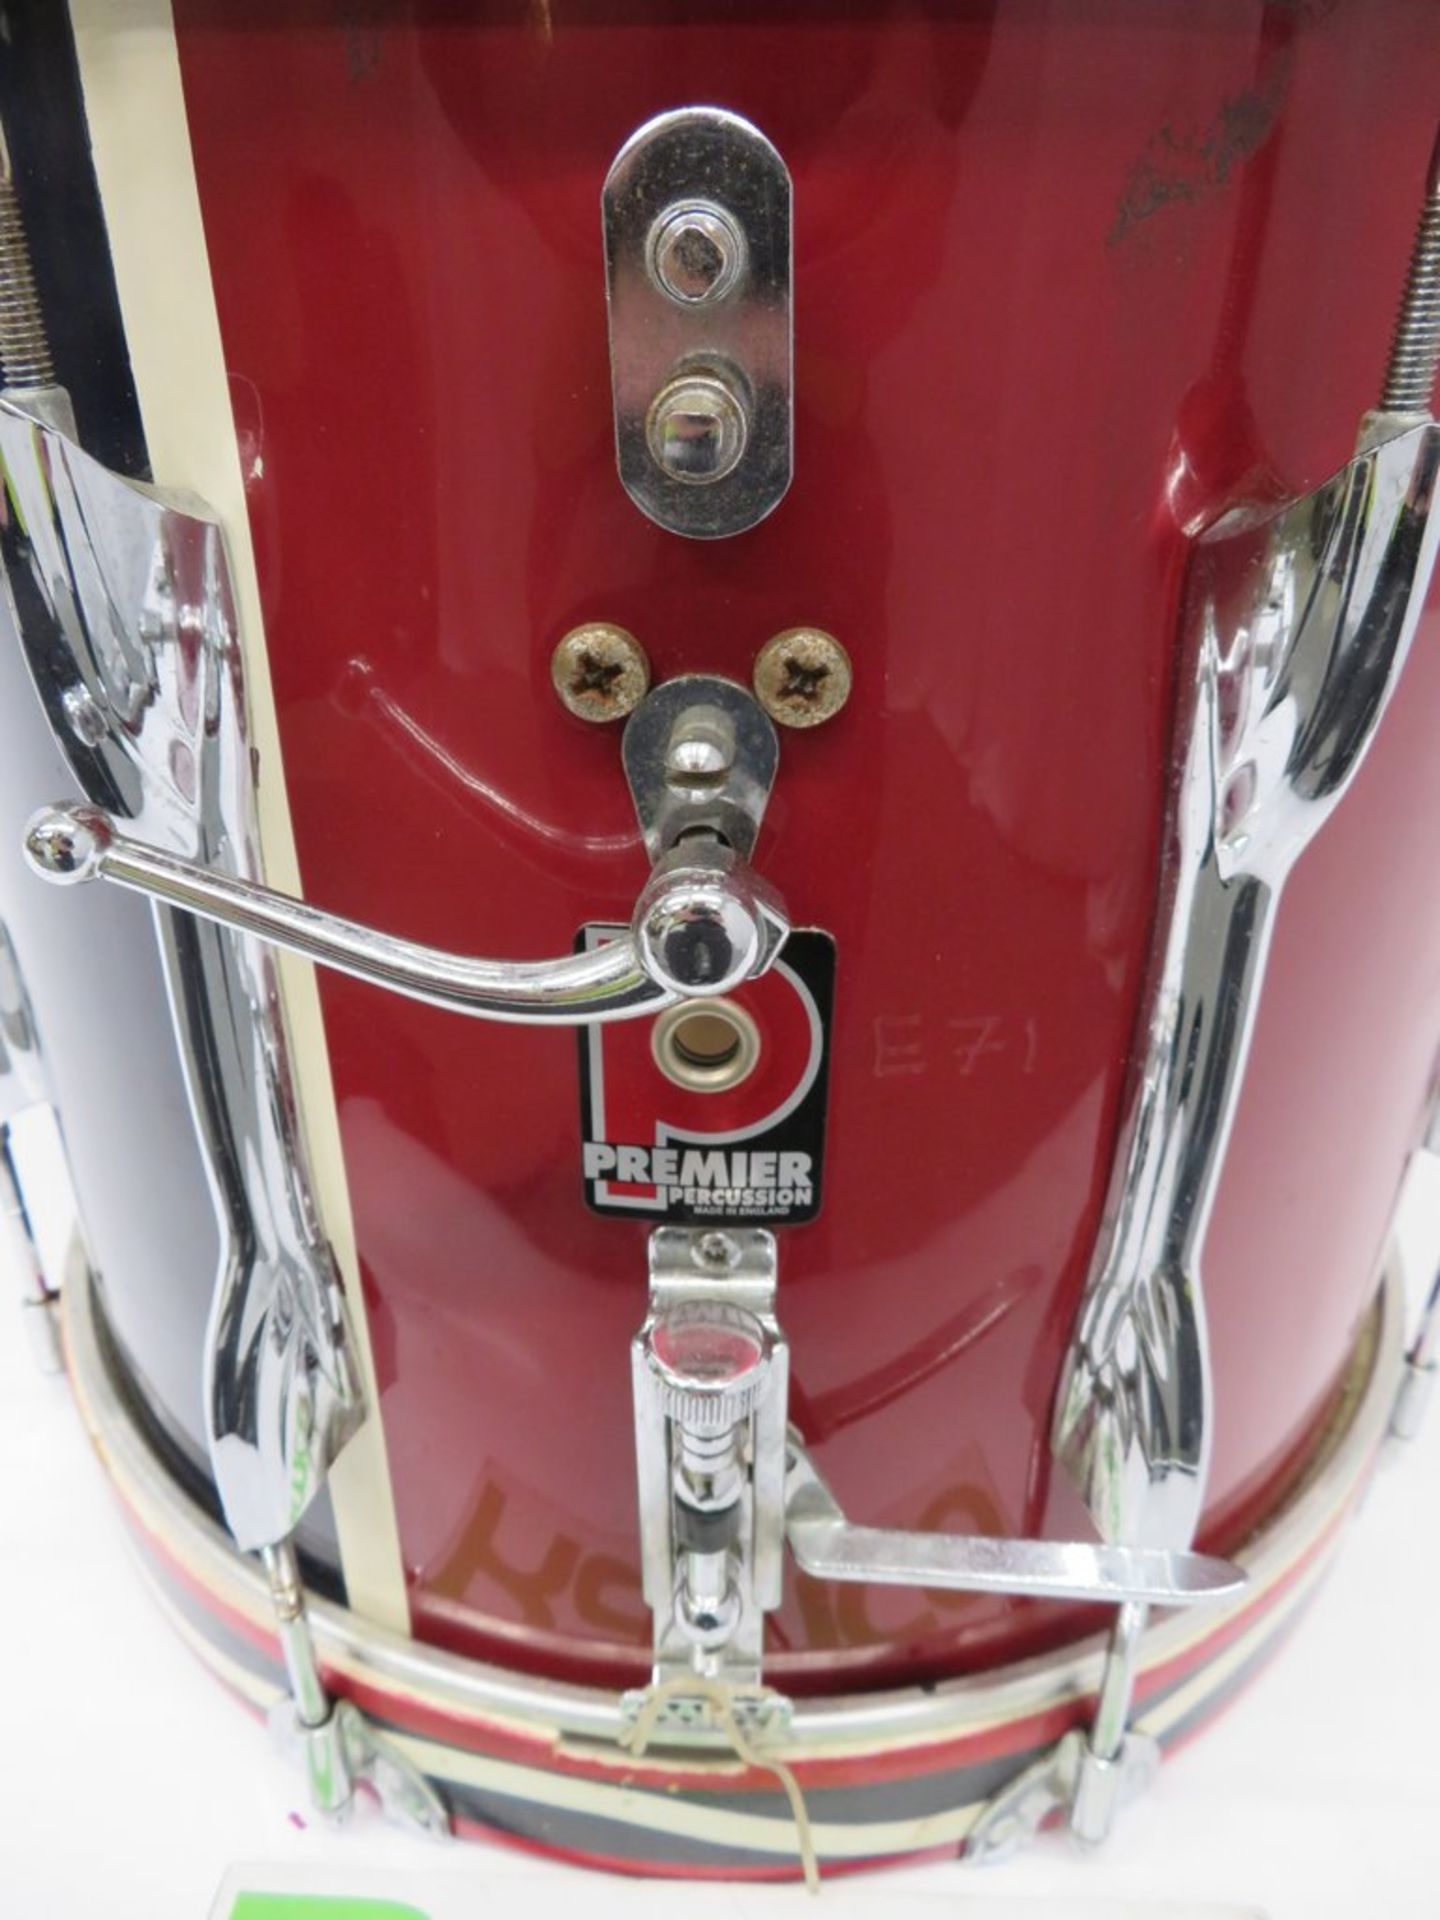 Premier Side Marching Snare Drum. - Image 4 of 8